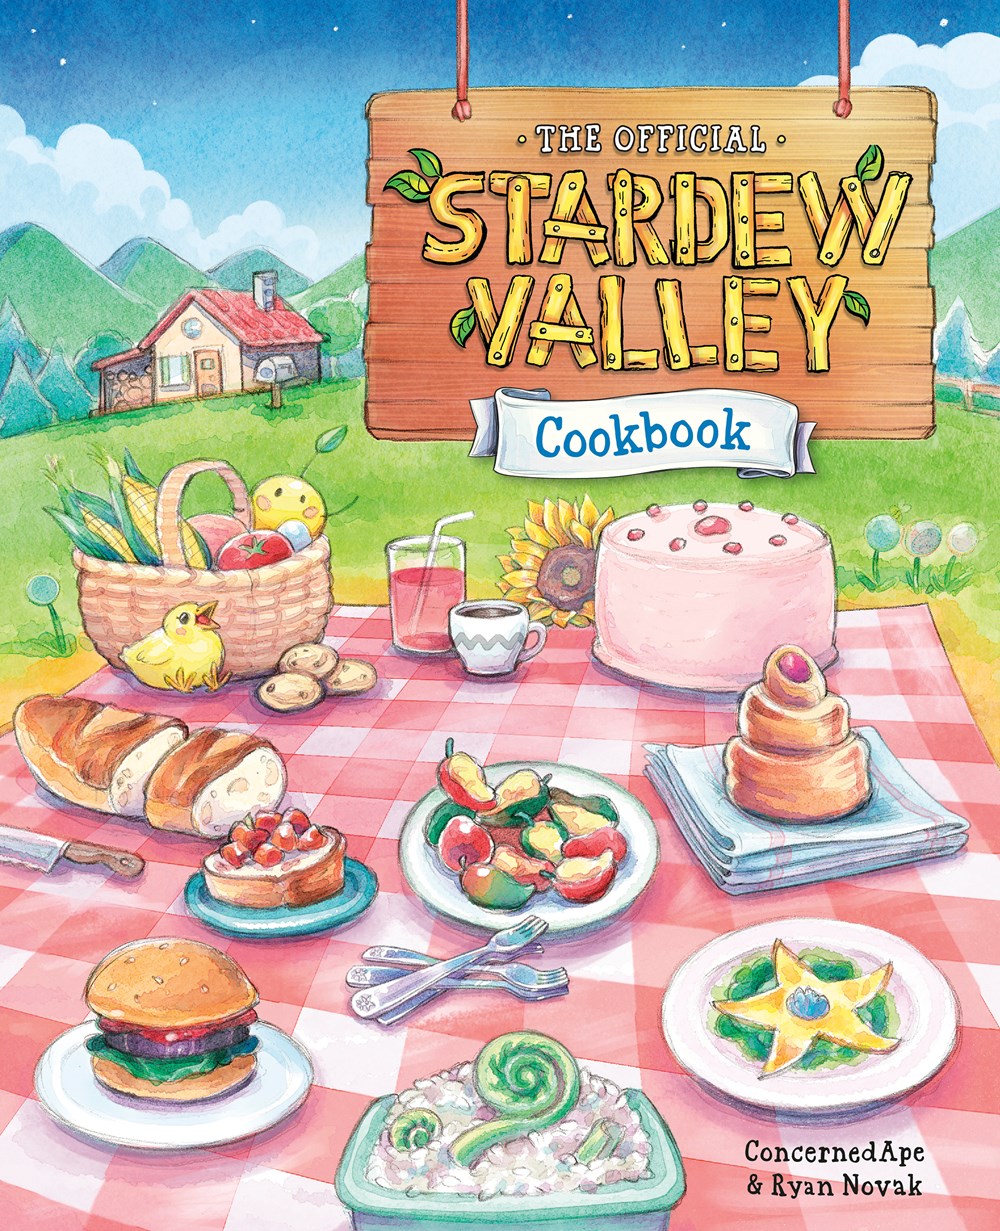 The Official Stardew Valley Cookbook (Hardcover) image count 0